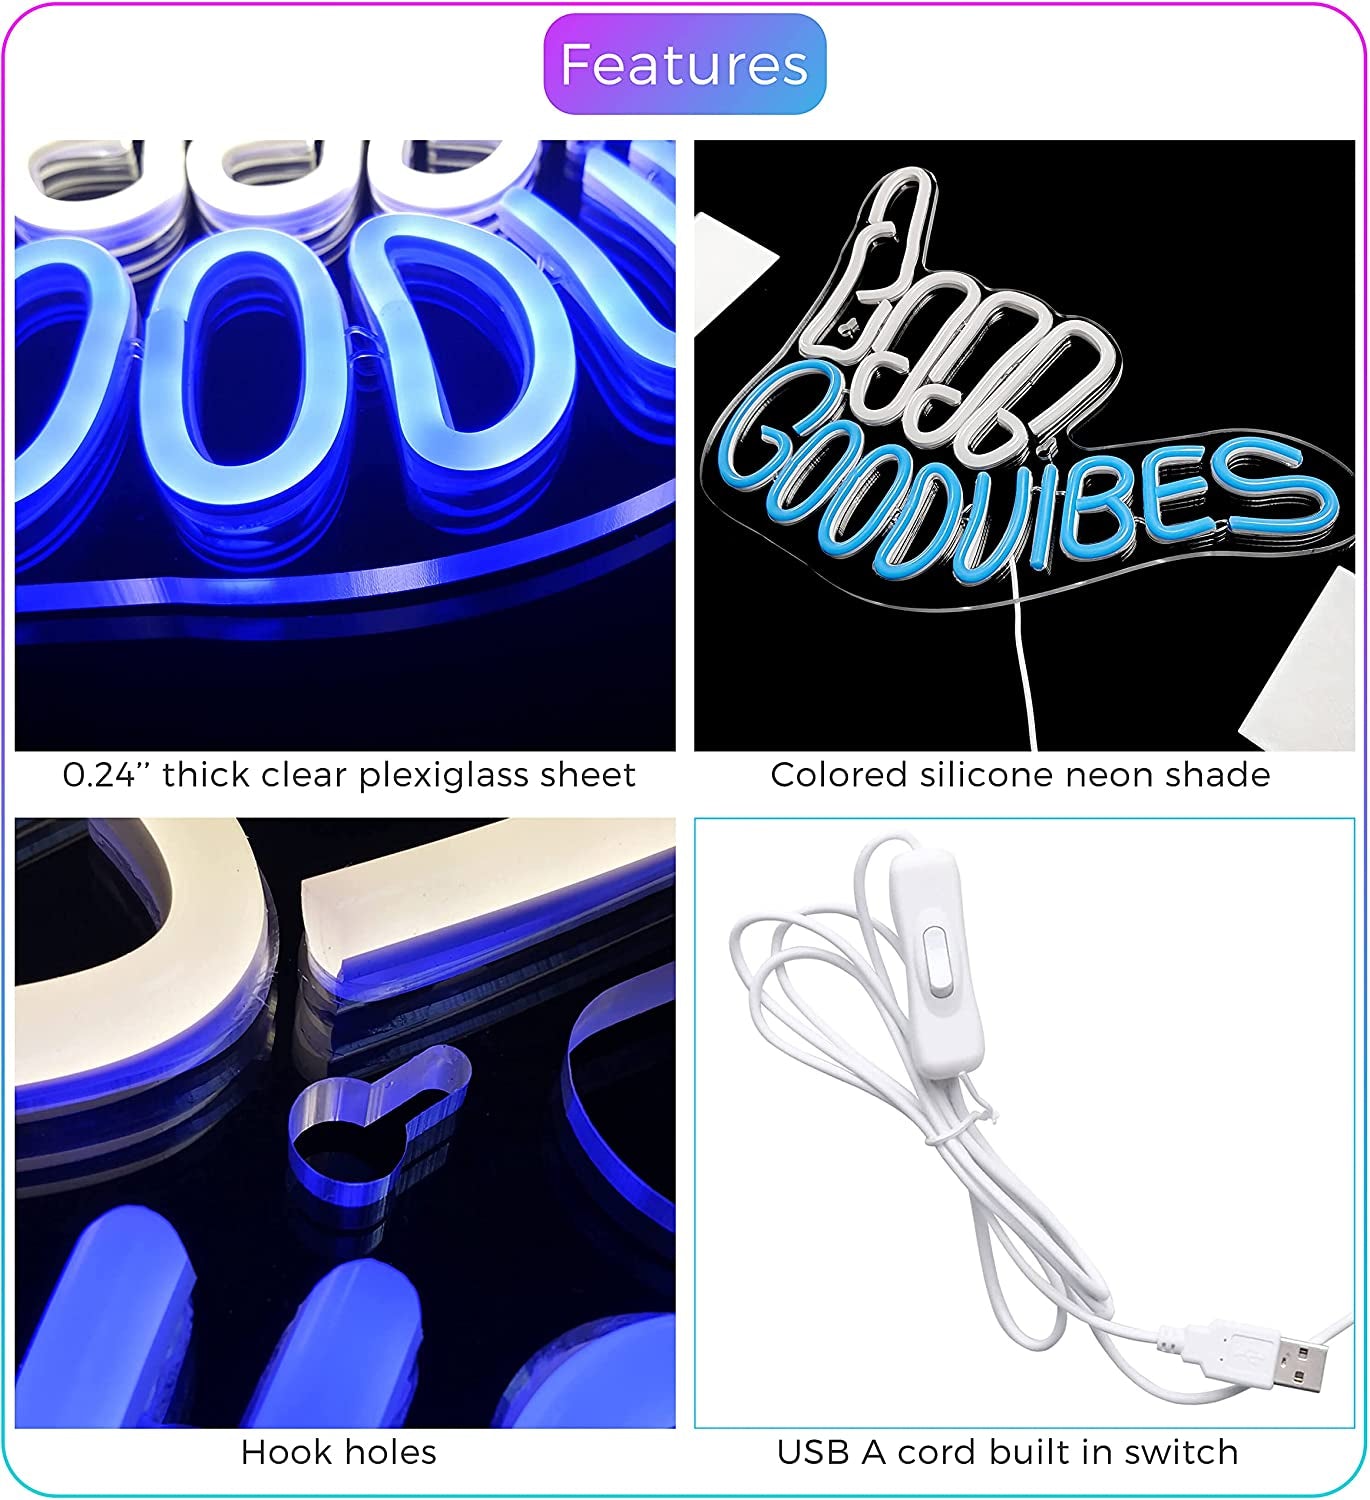 Good Vibes Neon Sign Light for Wall Décor Good Vibes Only Hand Neon Signs Bedroom Game Room Light up LED Wall Sign Cool Things for Teen Room Sign Gamer Gift Party Holiday (2 - Good Vibes - Blue)